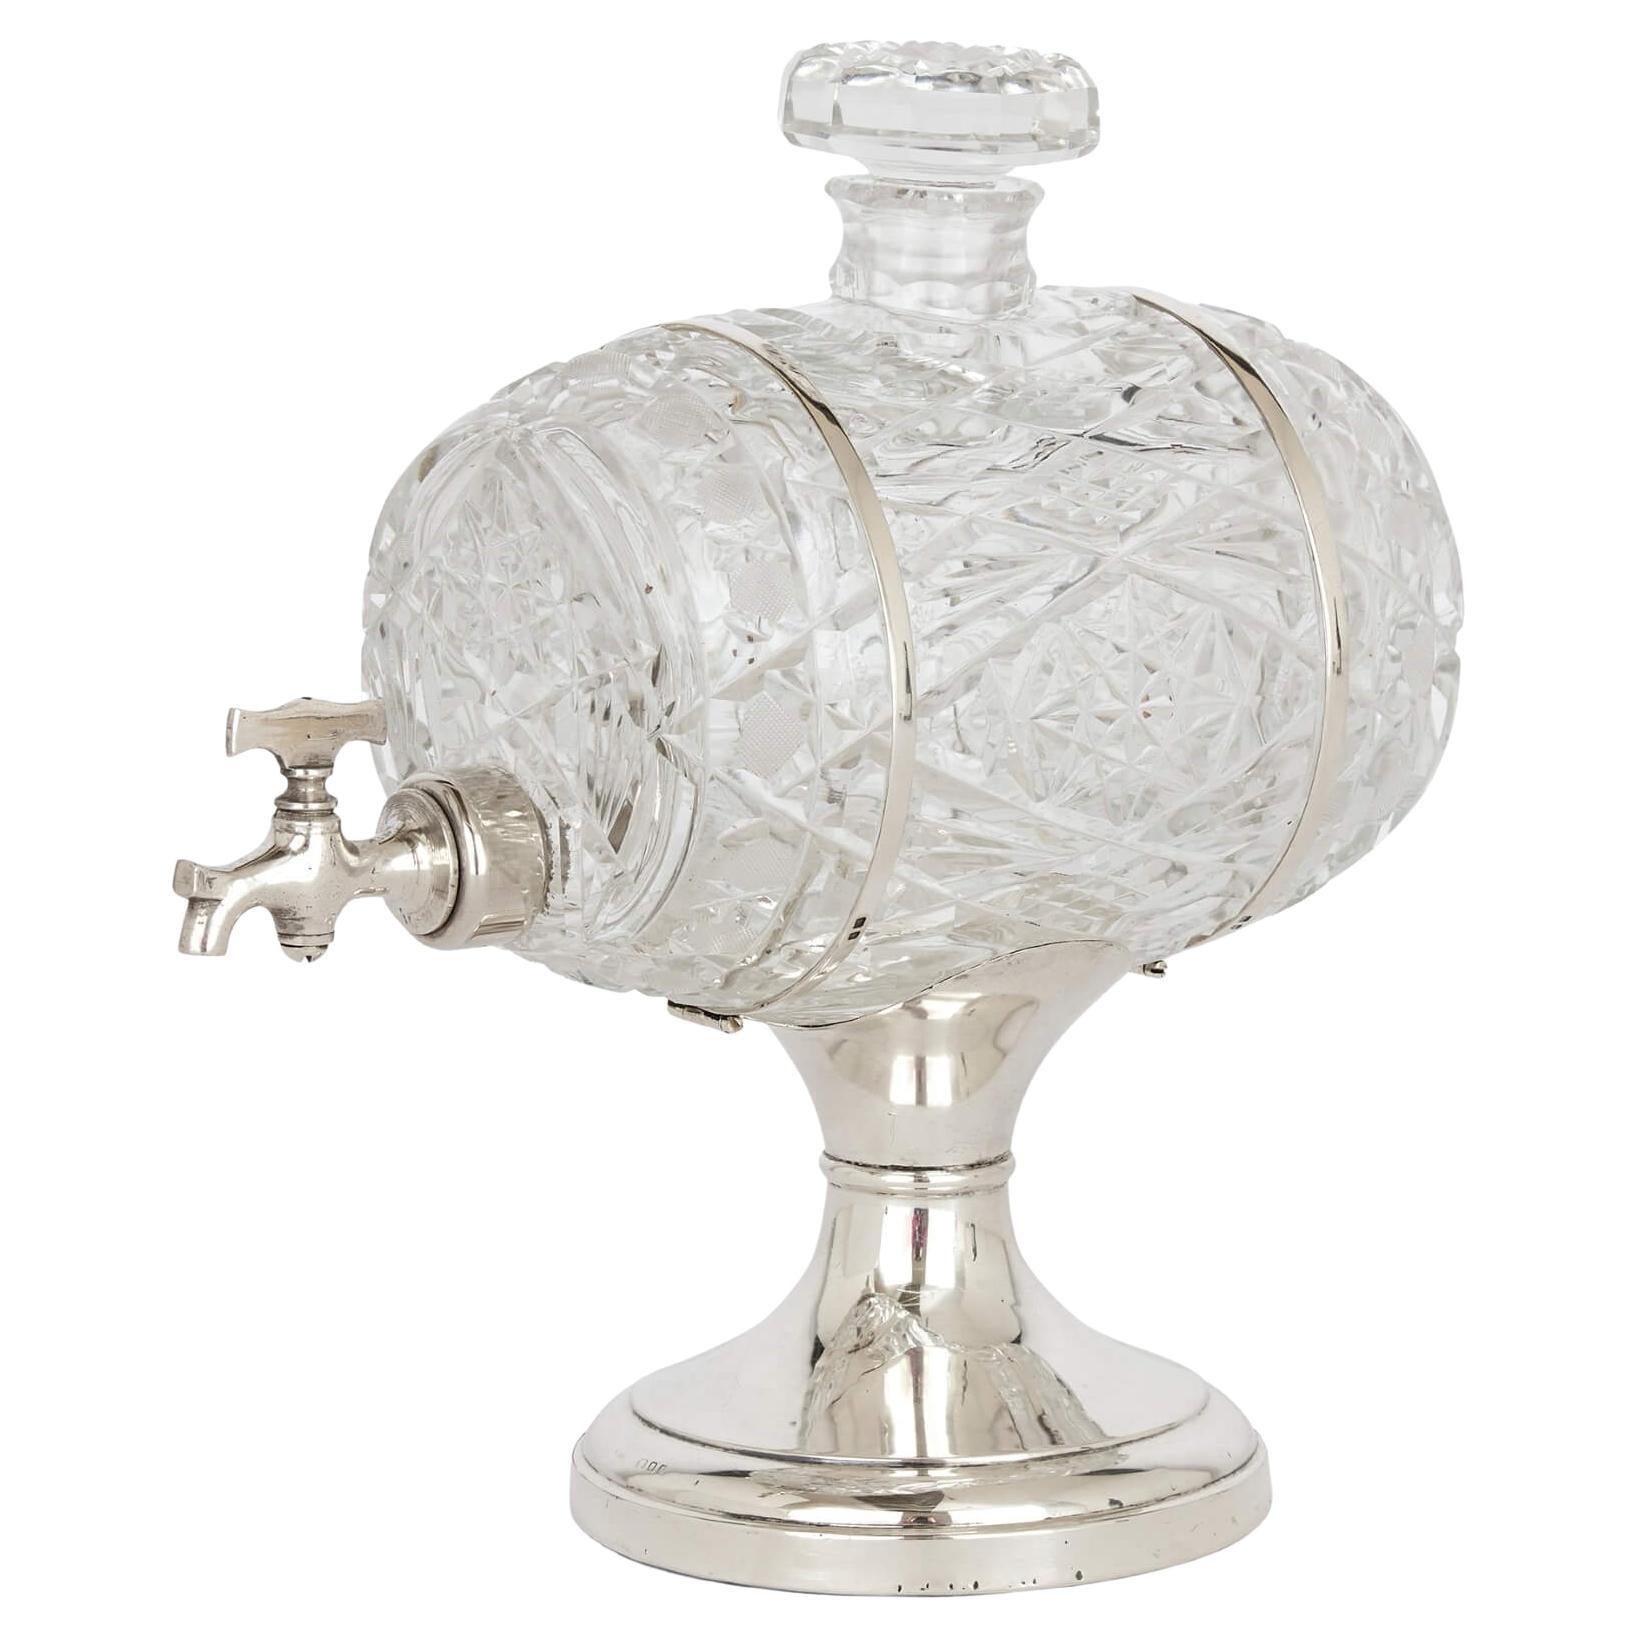 English Crystal and Silver Barrel Decanter For Sale